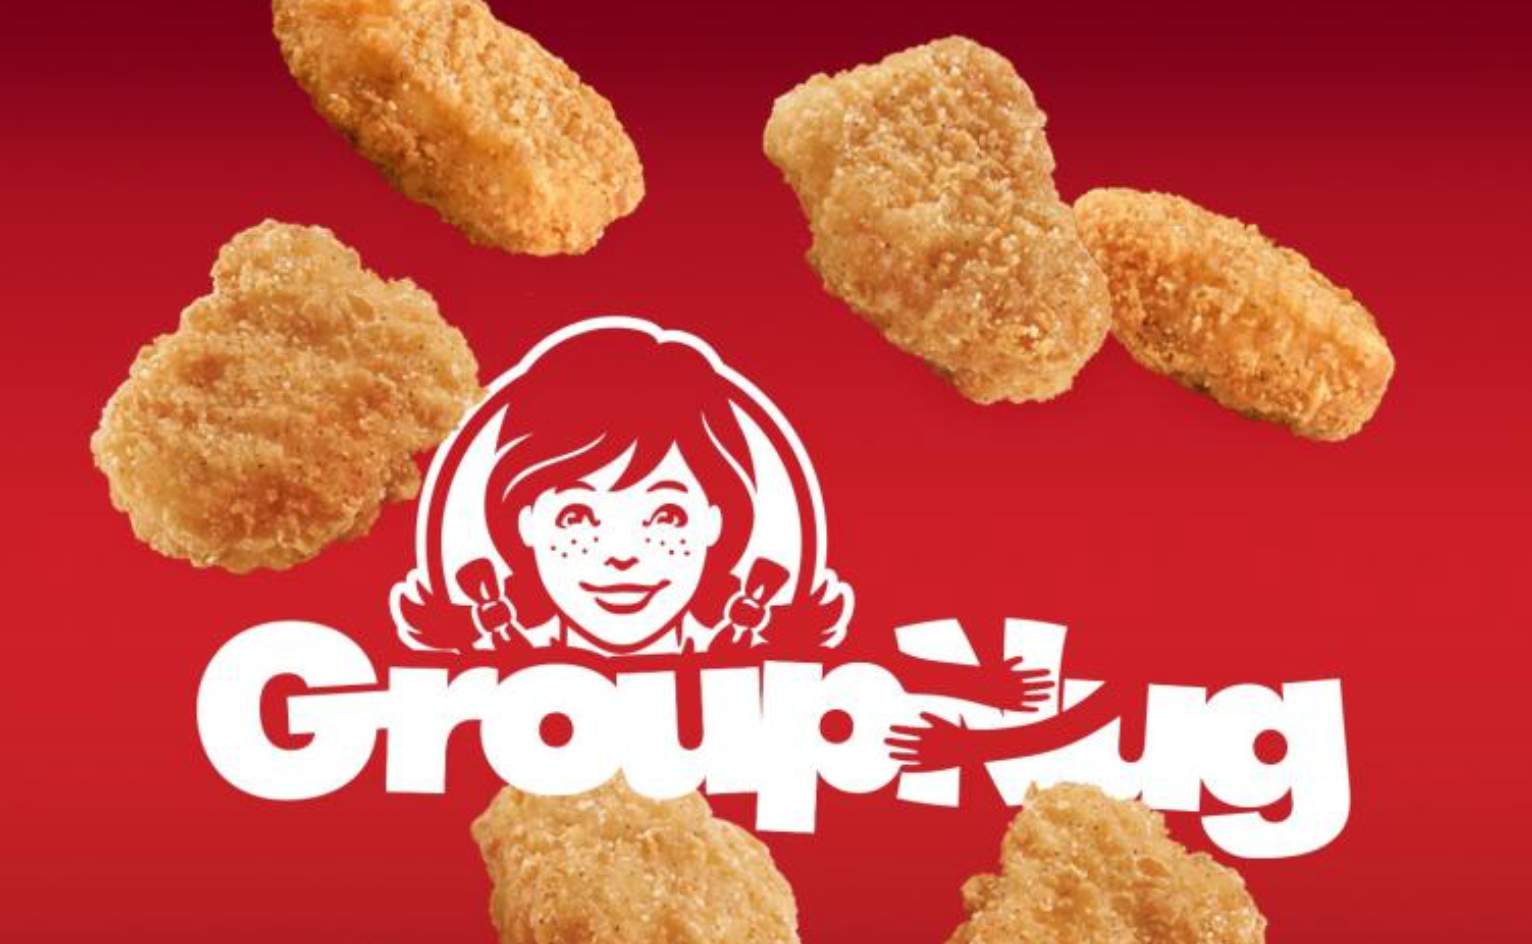 Need a nug? Wendy’s giving away free nuggets on Friday